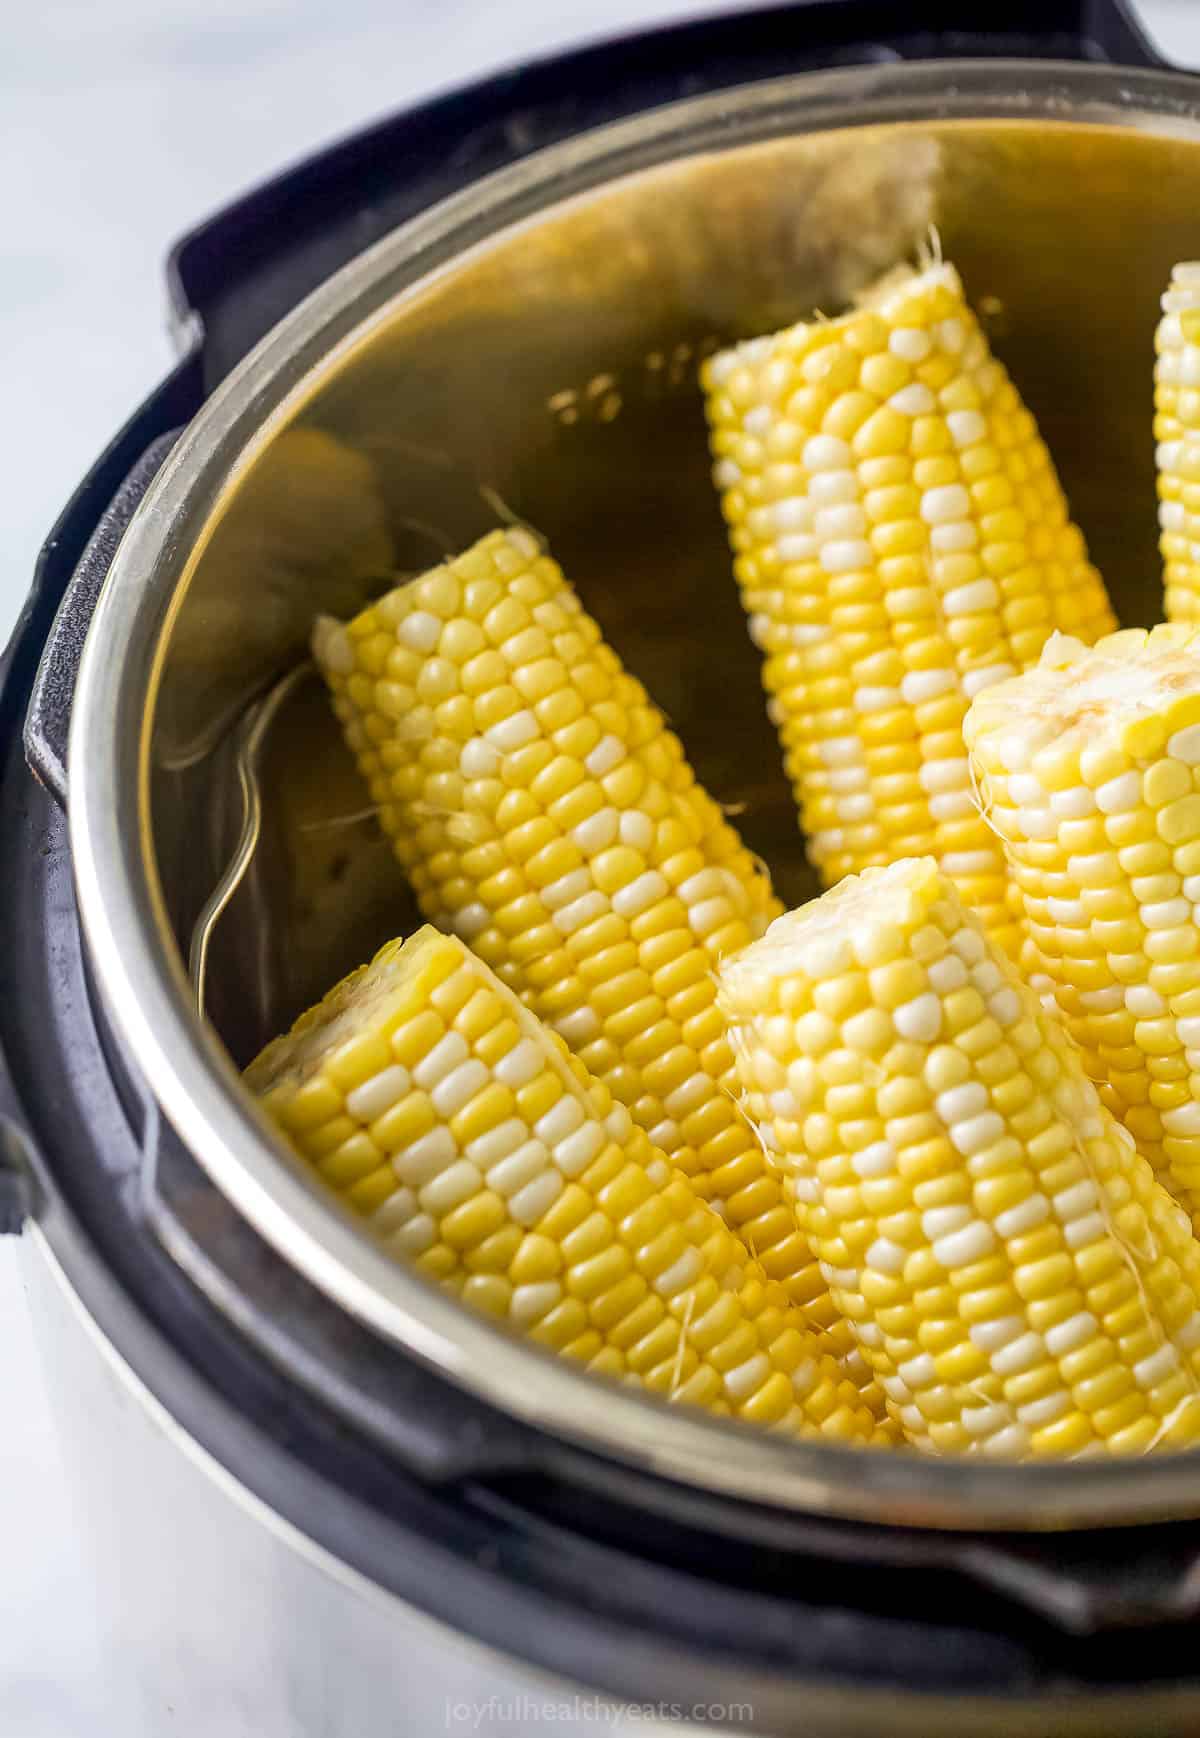 Six shucked and trimmed ears of corn sitting upright in a pressure cooker